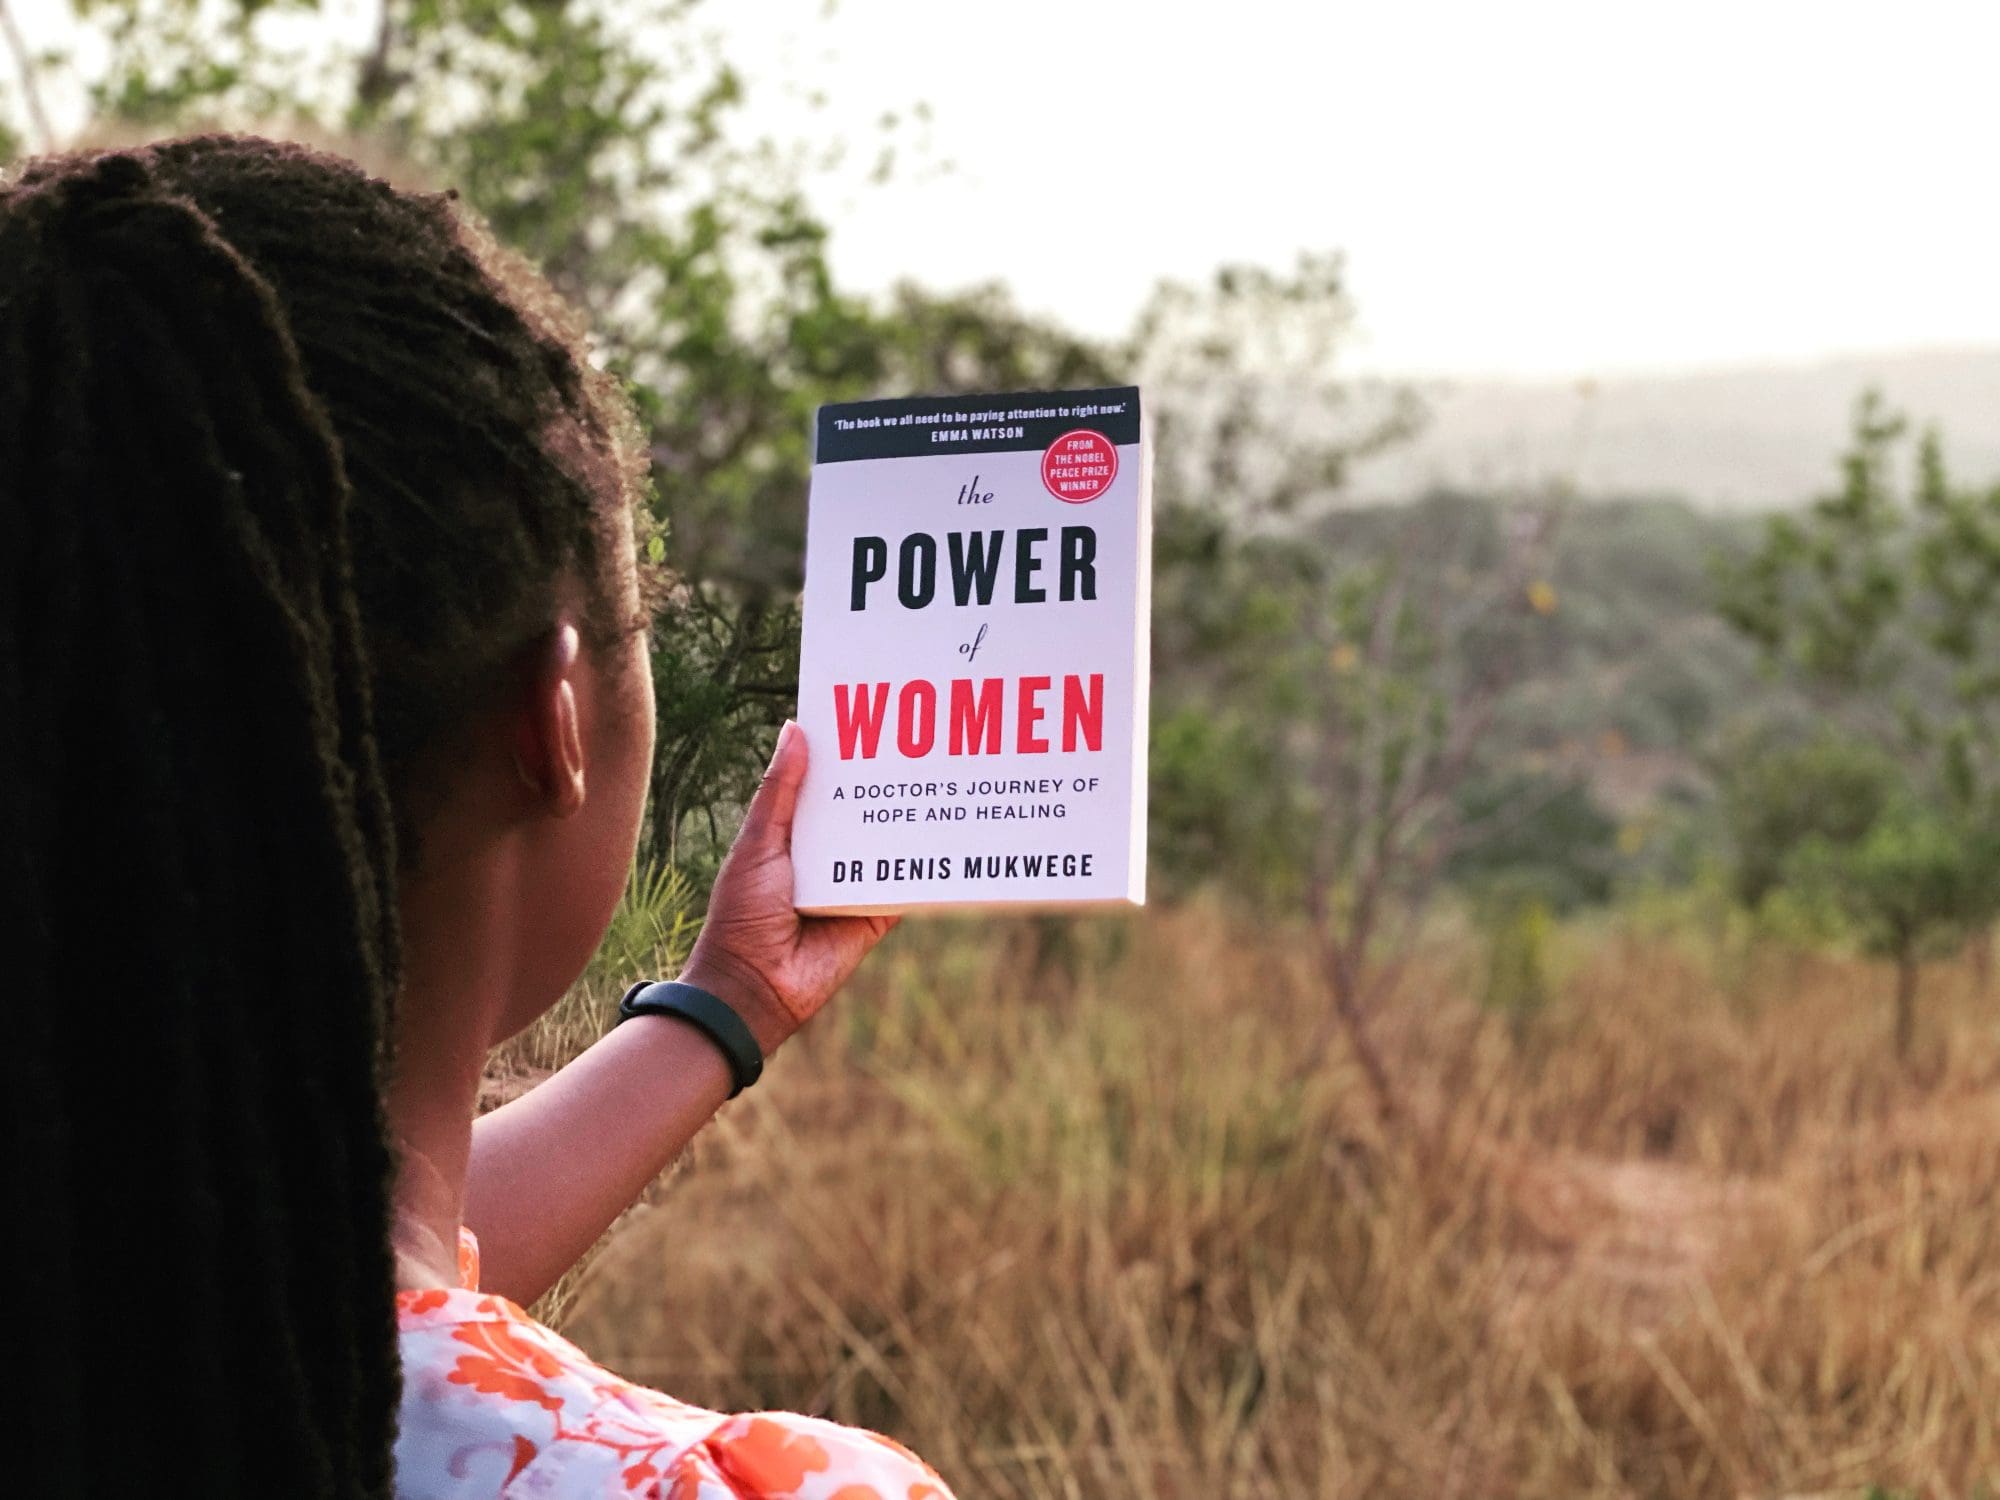 The Power of Women: A Doctor's Journey of Hope and Healing by Denis Mukwege